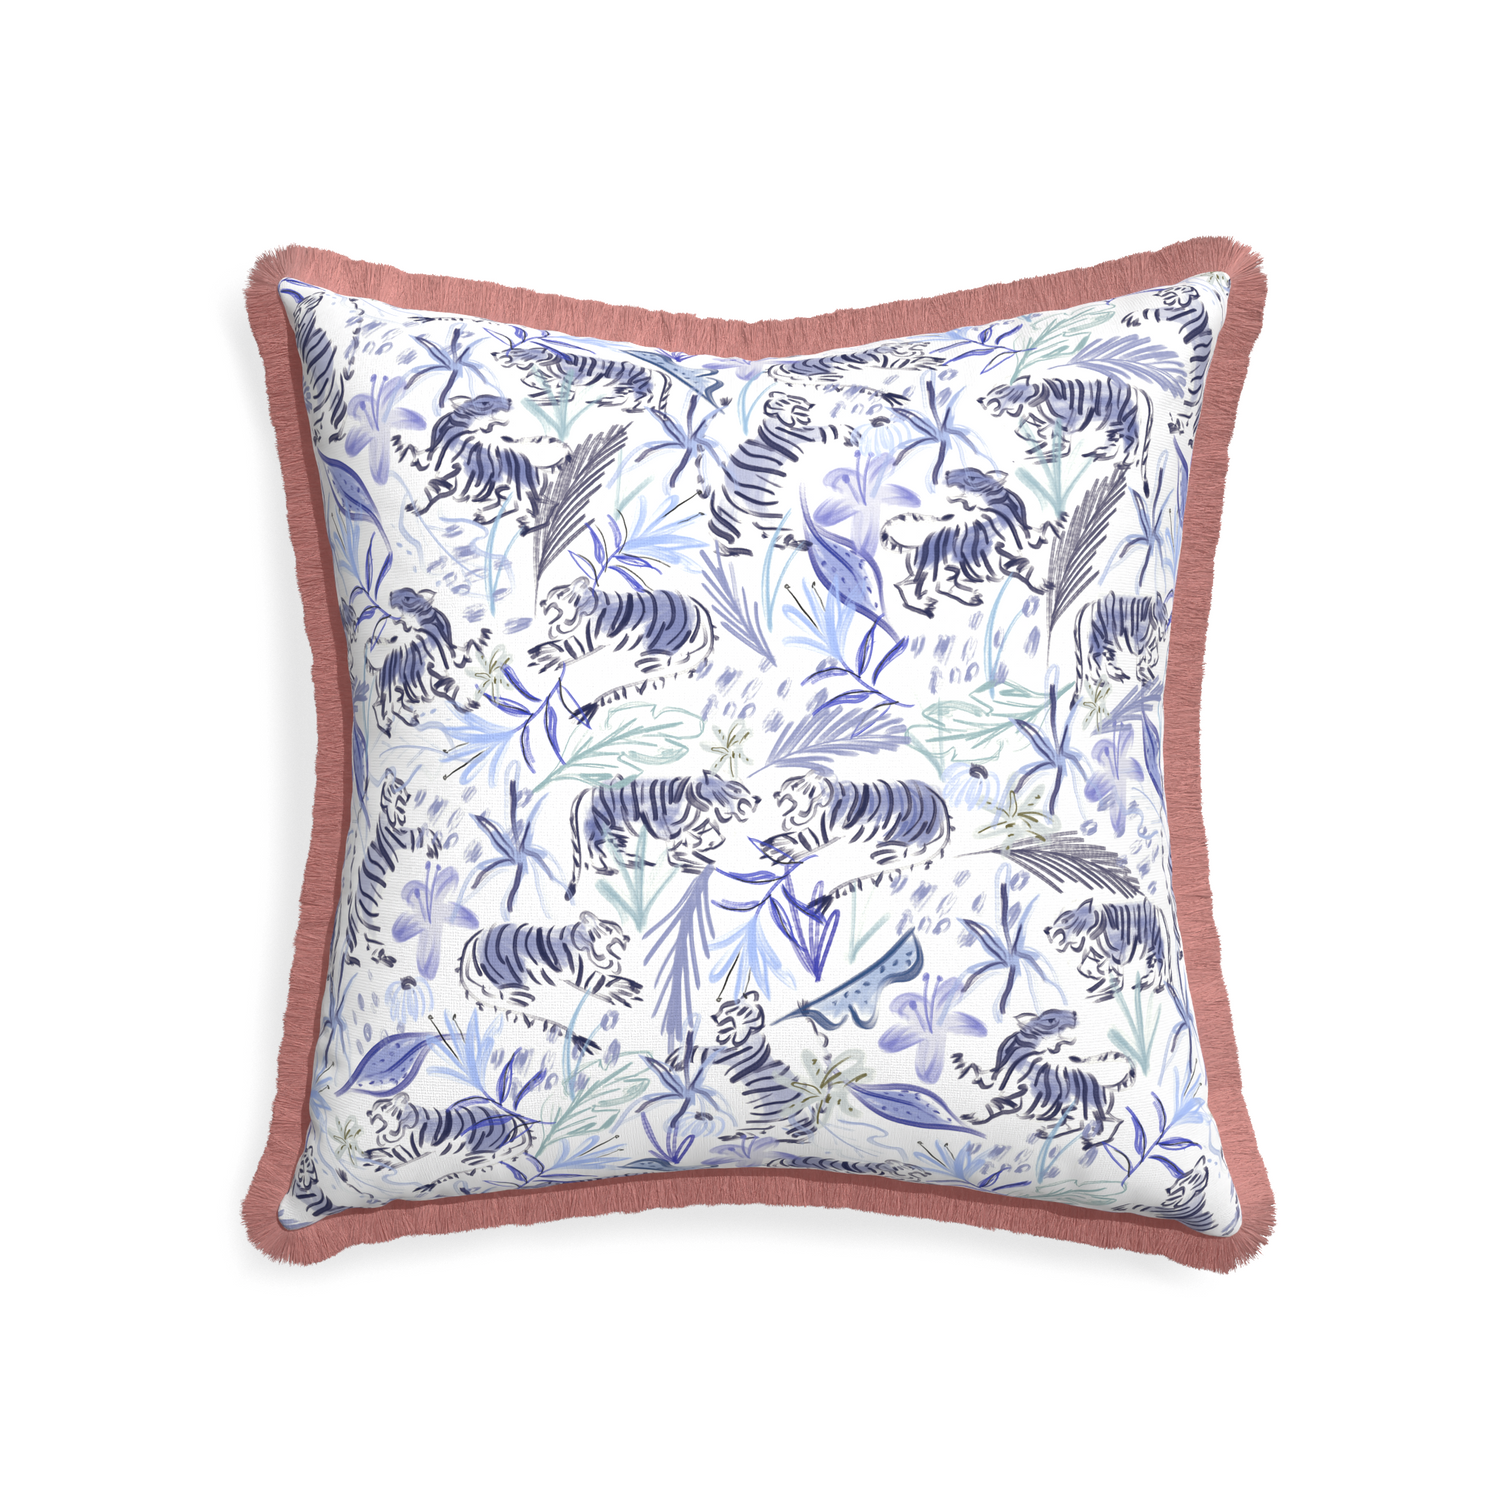 22-square frida blue custom blue with intricate tiger designpillow with d fringe on white background